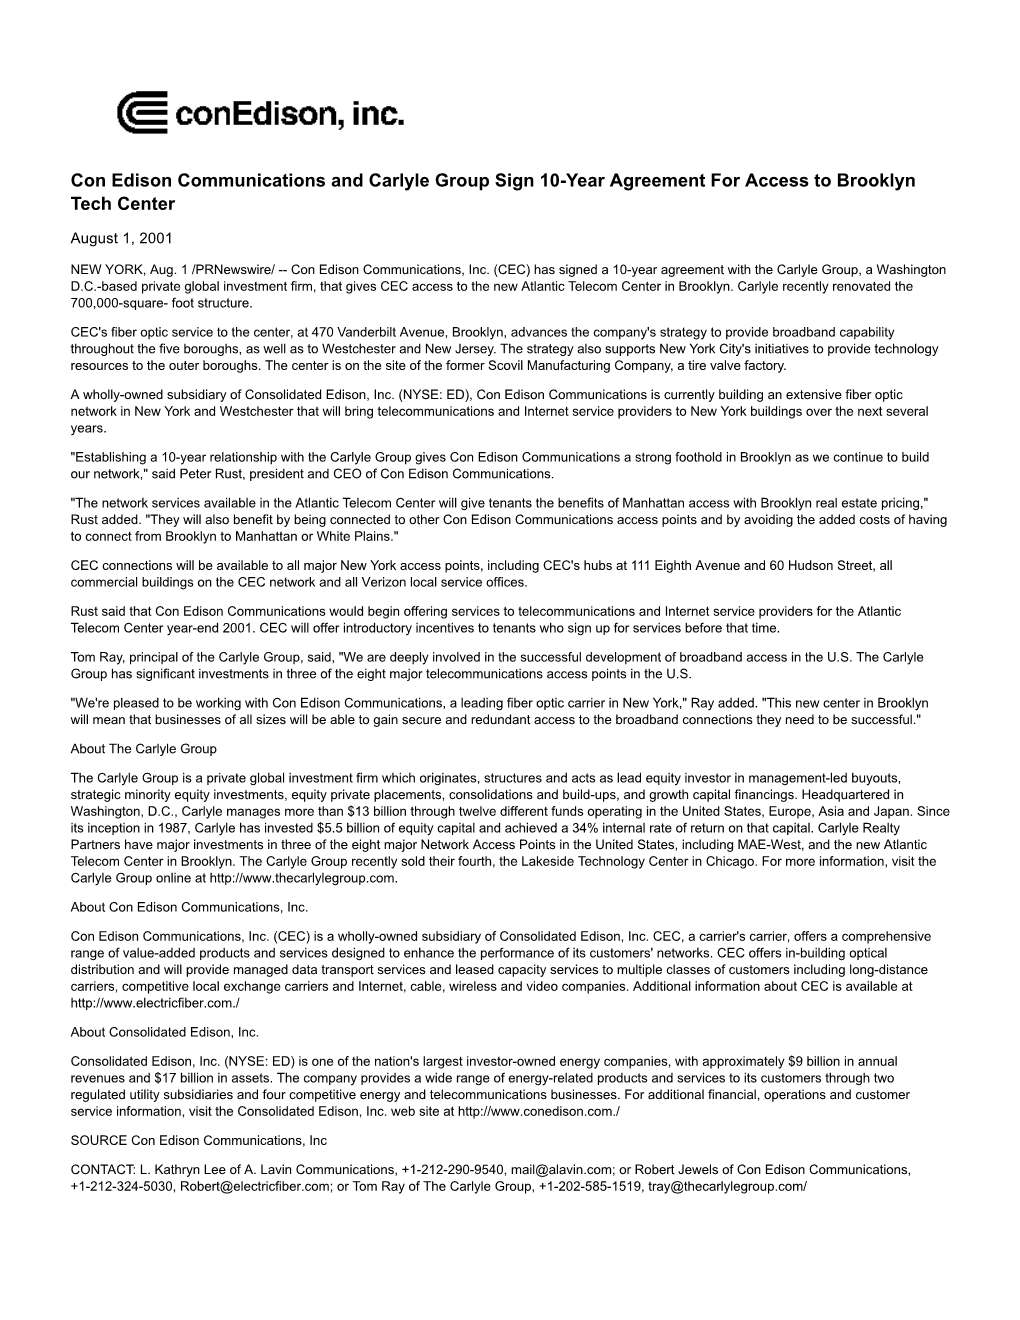 Con Edison Communications and Carlyle Group Sign 10-Year Agreement for Access to Brooklyn Tech Center